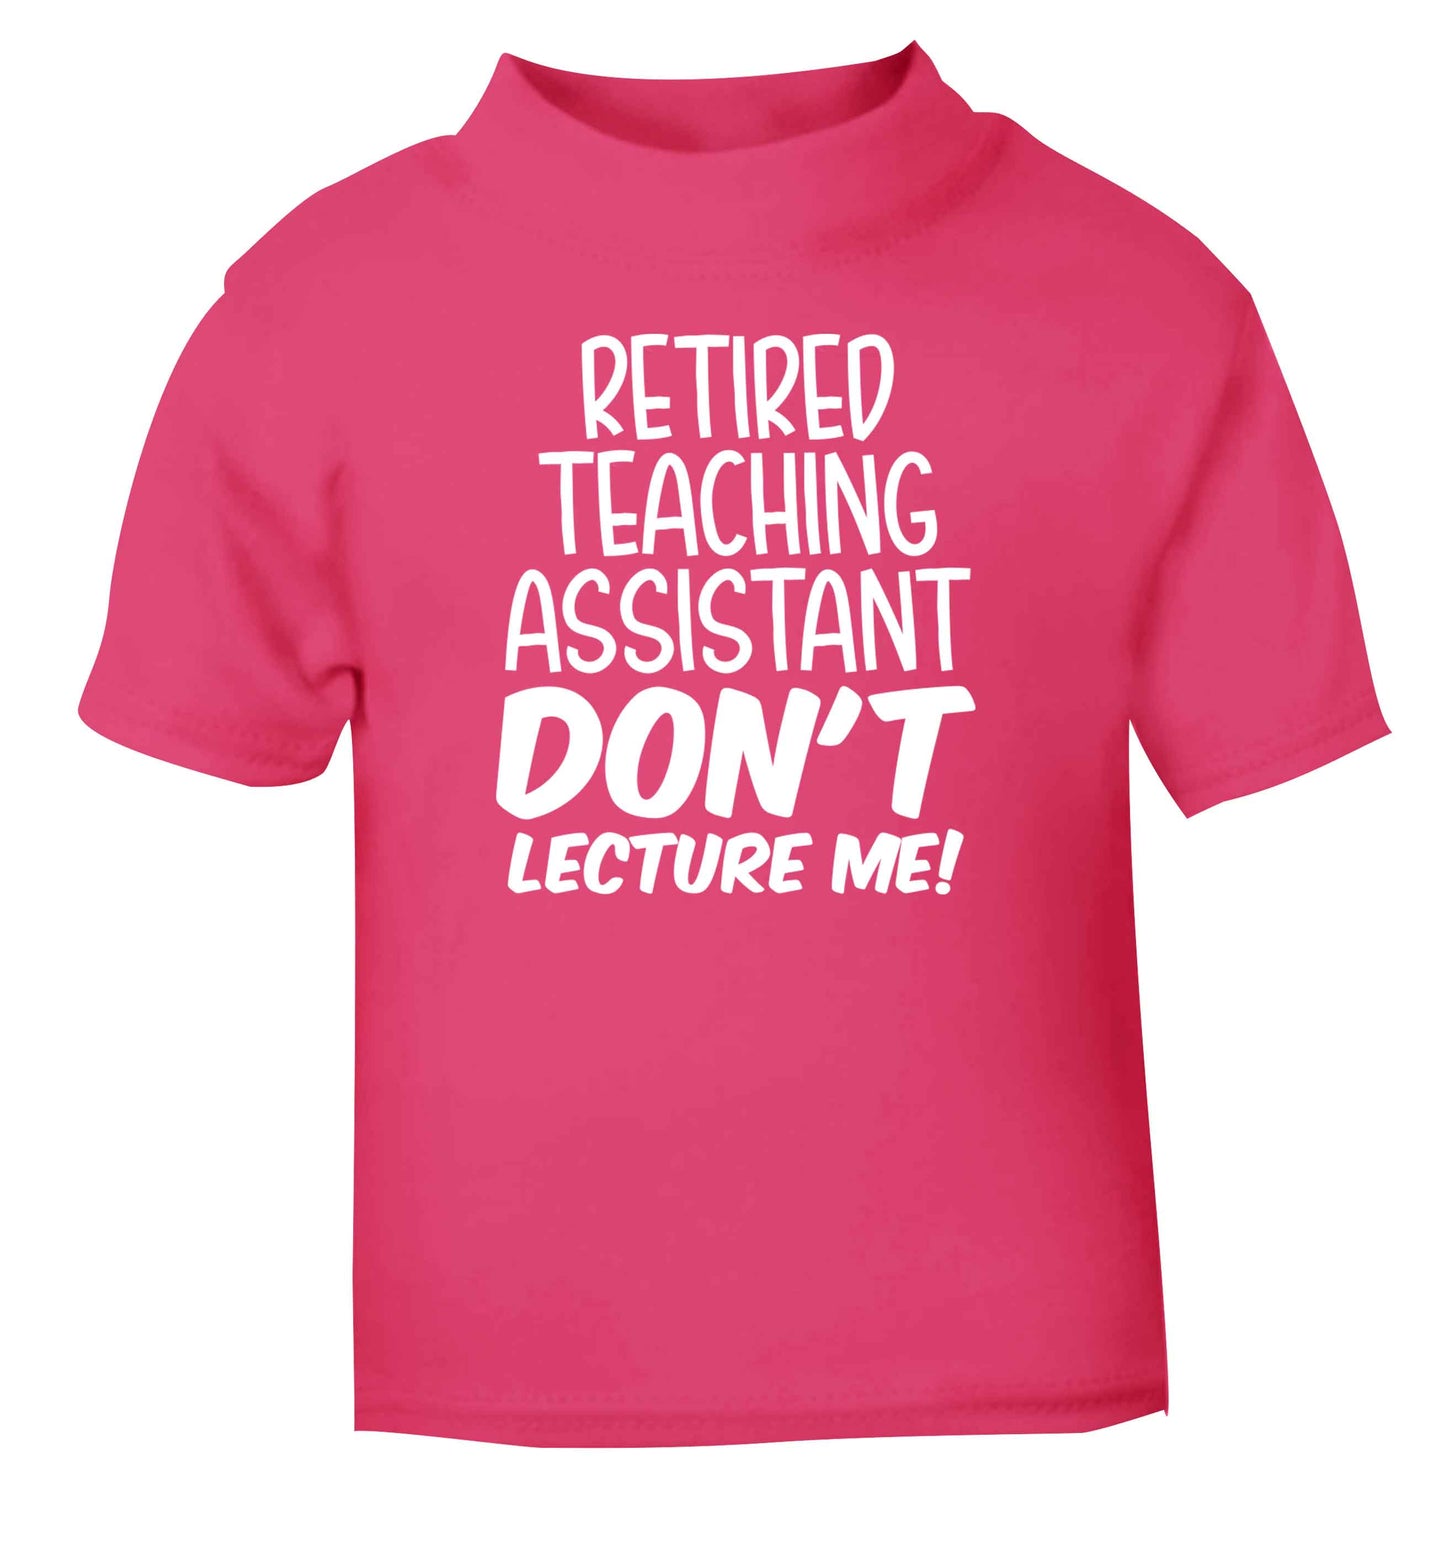 Retired teaching assistant don't lecture me pink Baby Toddler Tshirt 2 Years